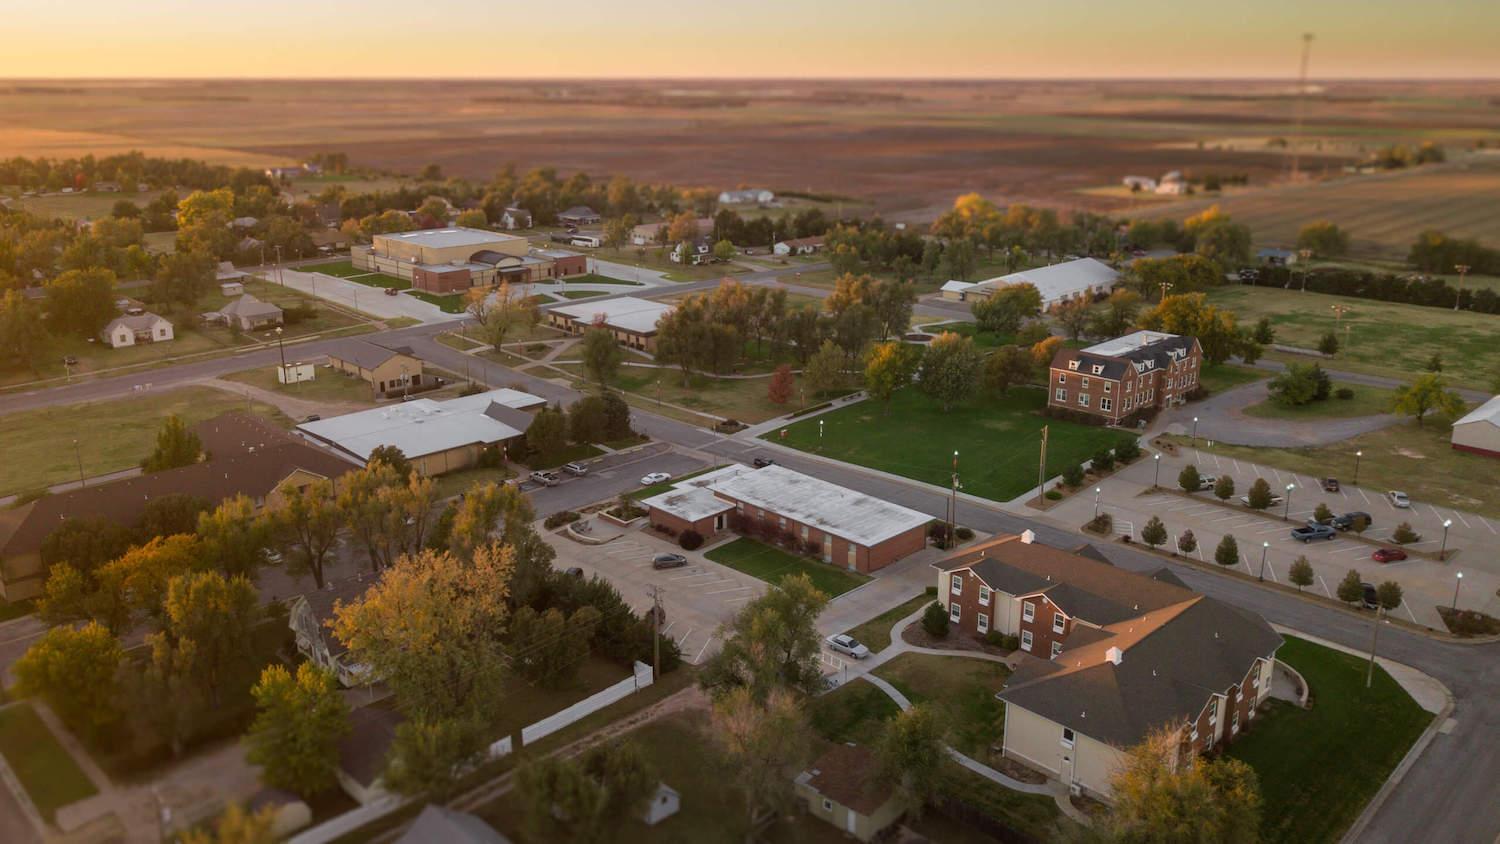 Barclay College, located in Haviland, Kansas, is a member of the Kansas Independent College Association. Some of the member colleges have just one IT person, said the association&#8217;s CISO.